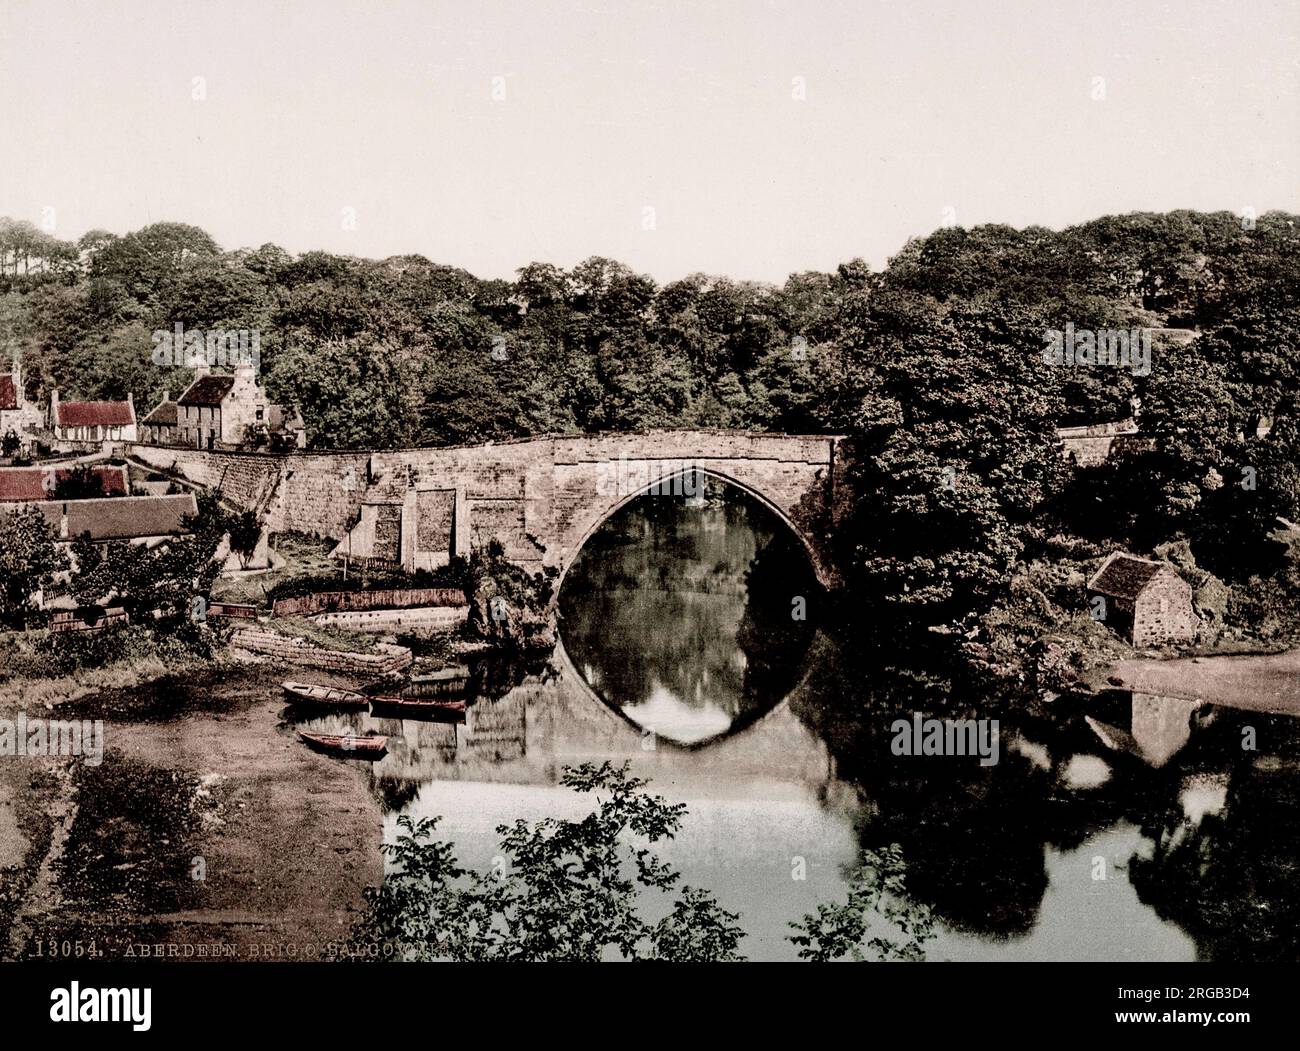 Vintage 19th century / 1900 photograph: The Brig o' Balgownie is a 13th-century bridge spanning the River Don in Old Aberdeen, Aberdeen, Scotland. Stock Photo